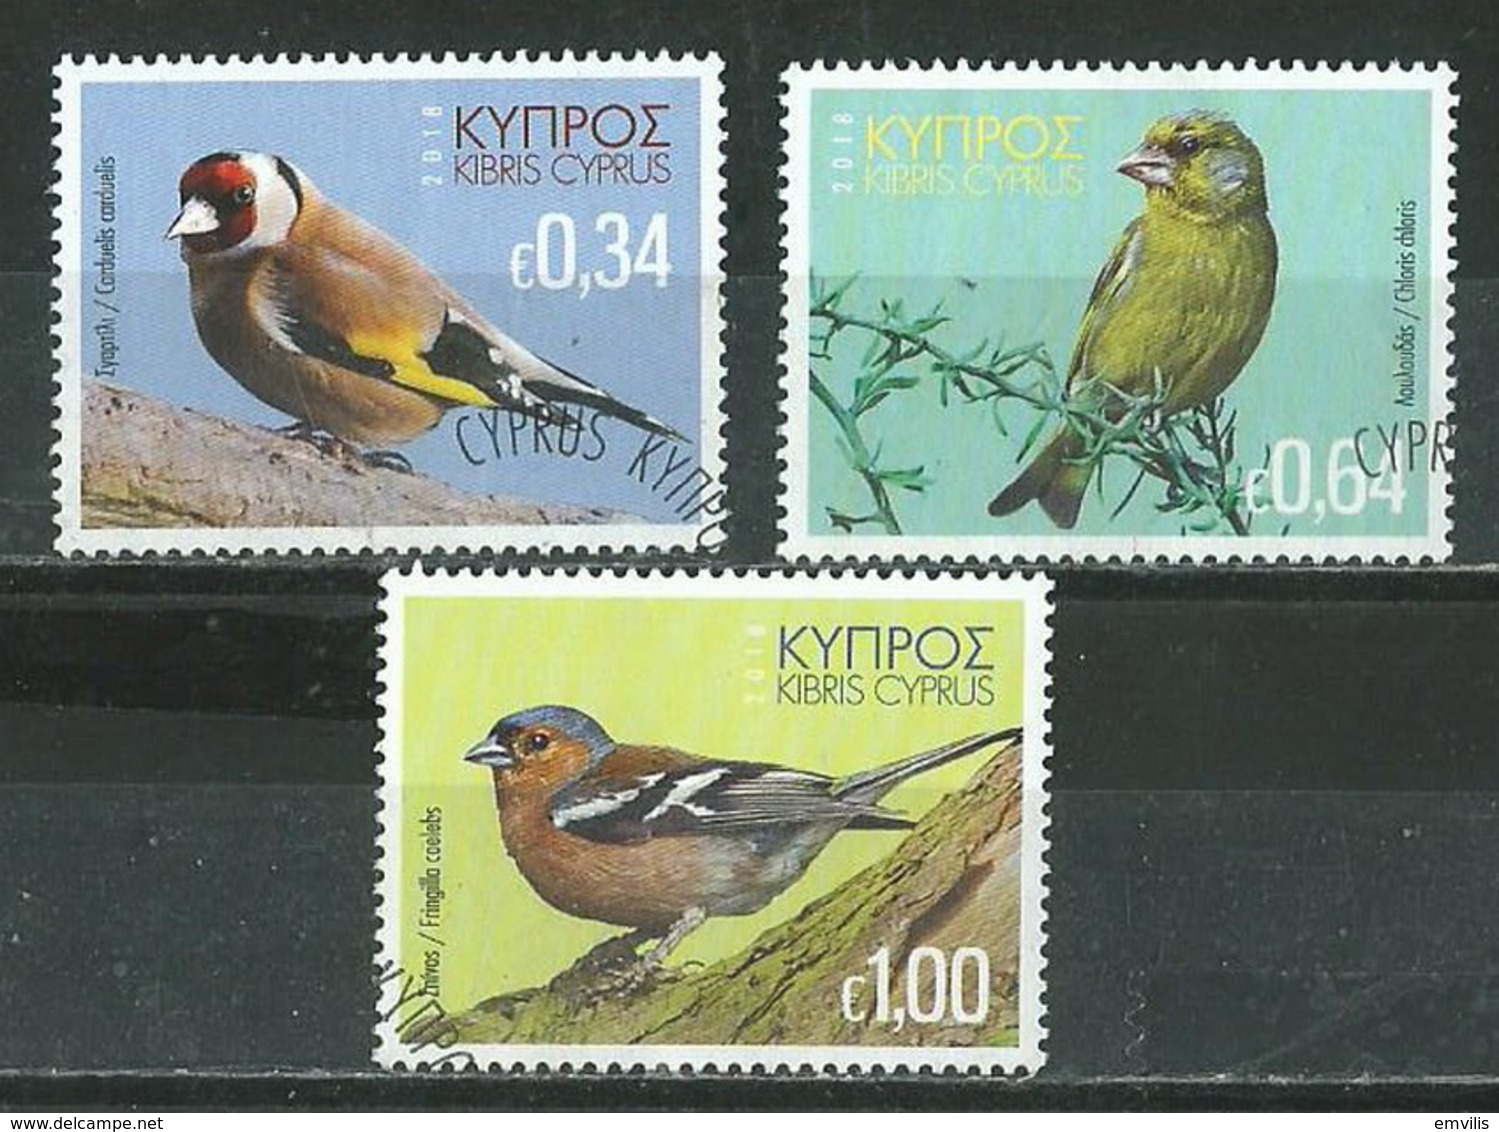 CYPRUS 2018 '' BIRDS OF CYPRUS '' SET USED - Used Stamps